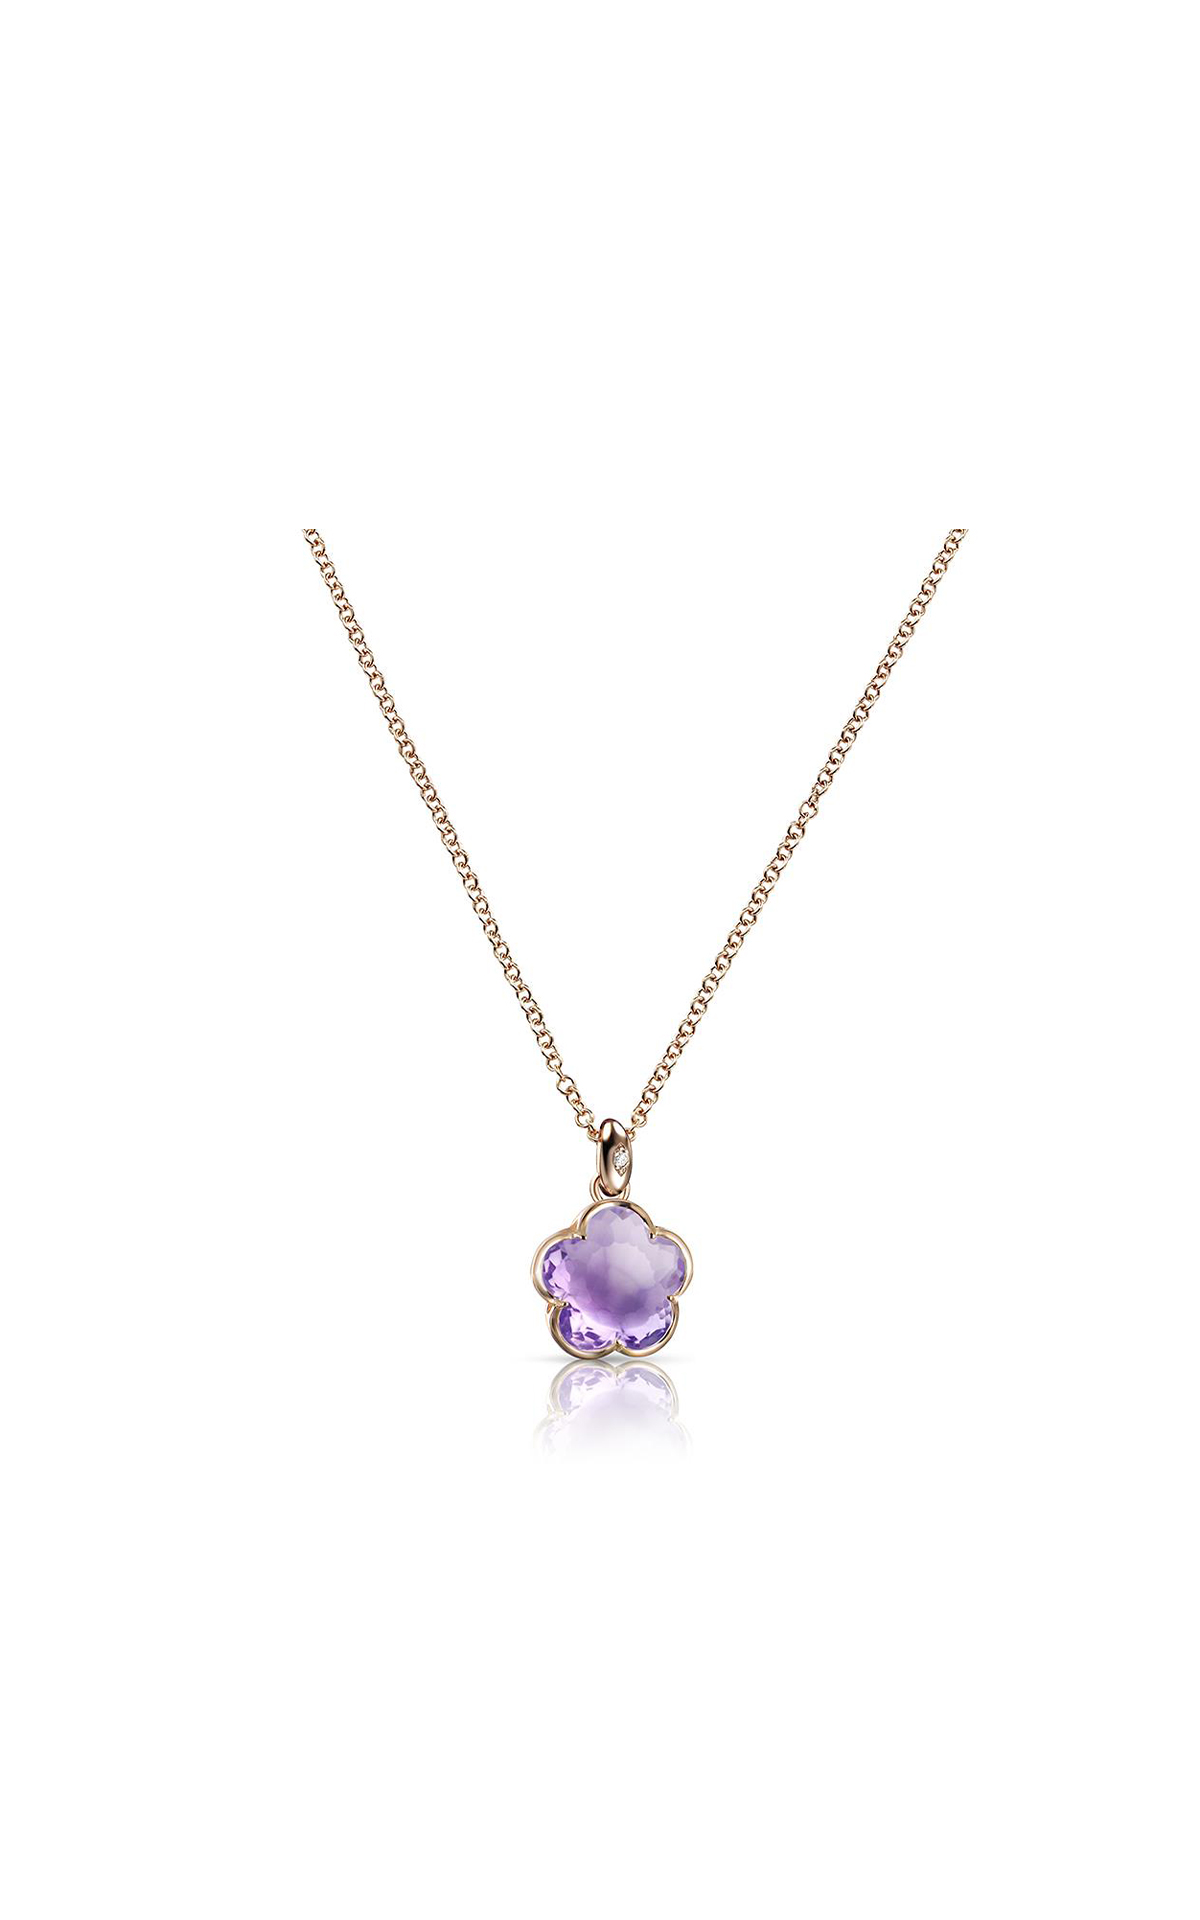 Pasquale Bruni gold amethyst necklace